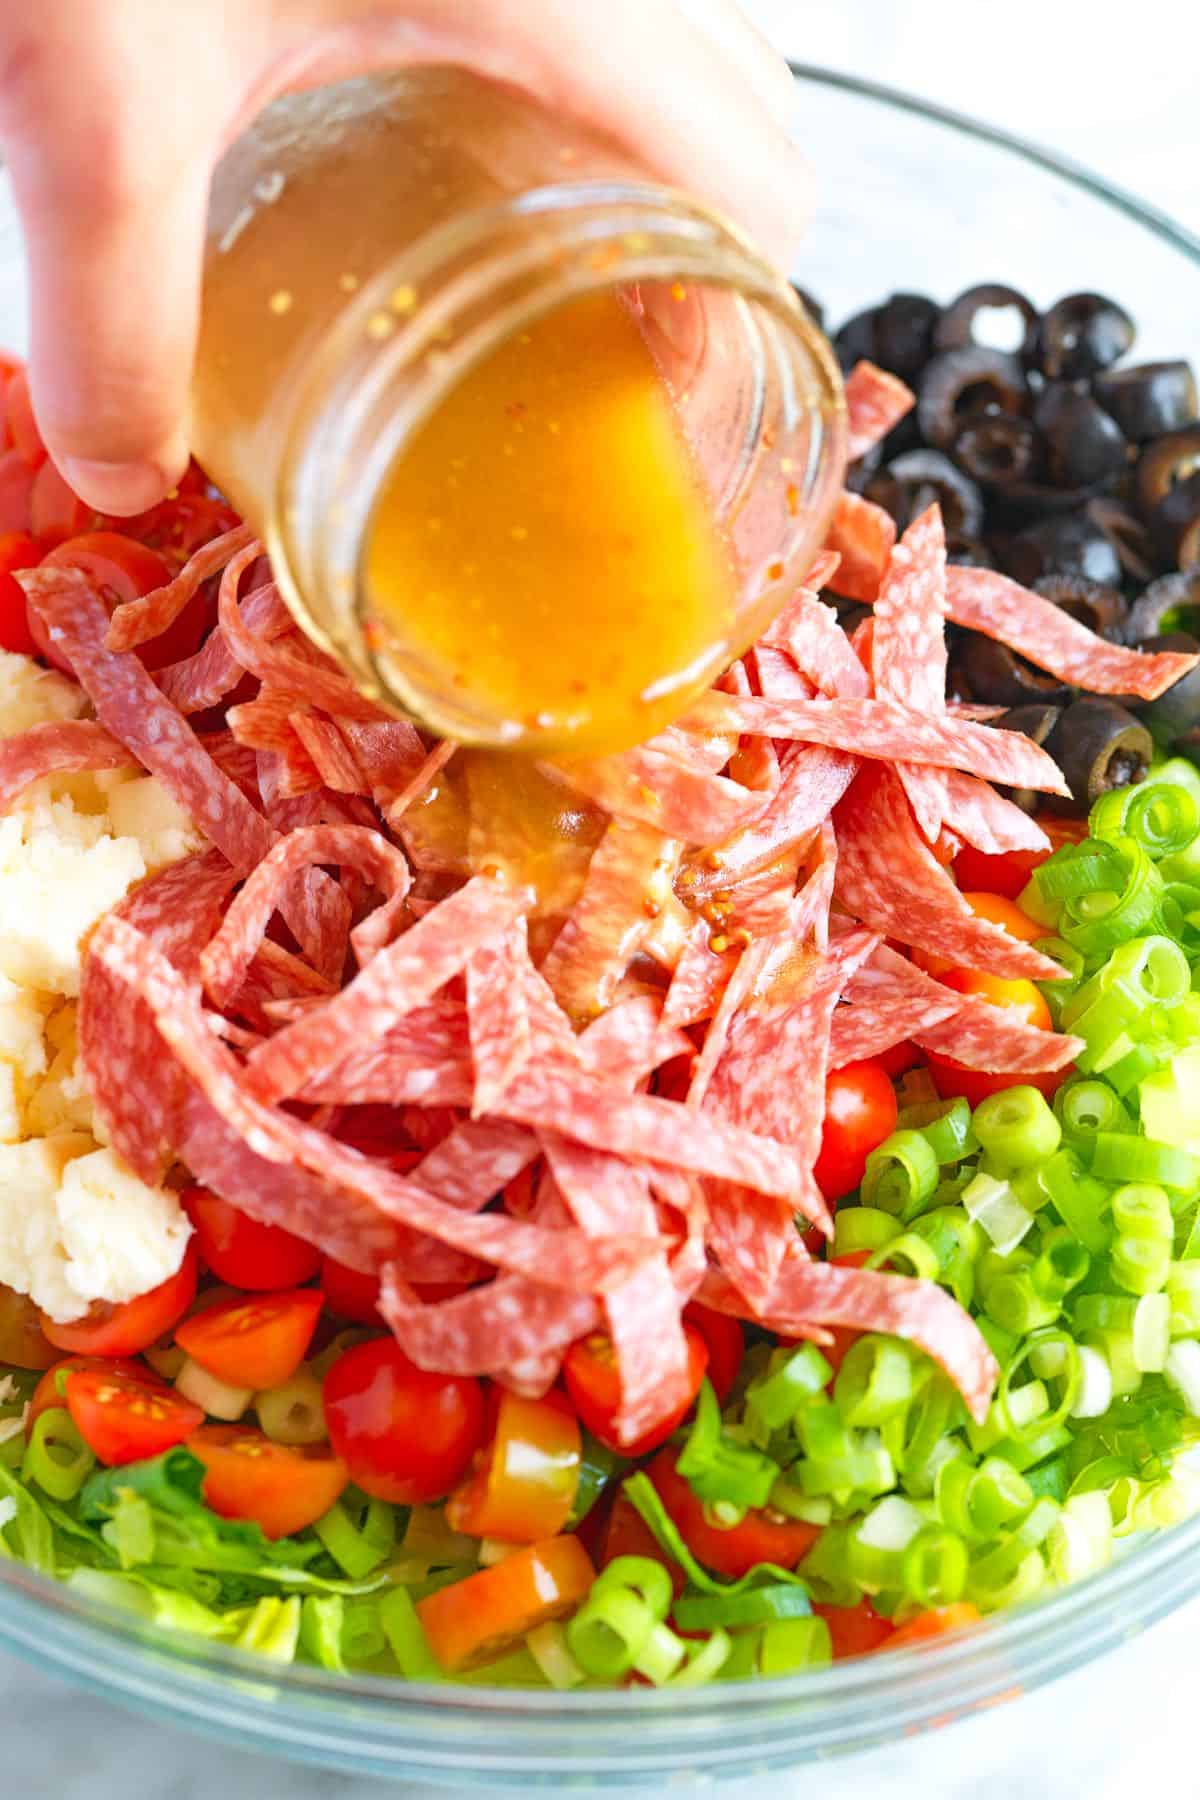 Pouring the red wine vinegar salad dressing over our chopped Italian salad.